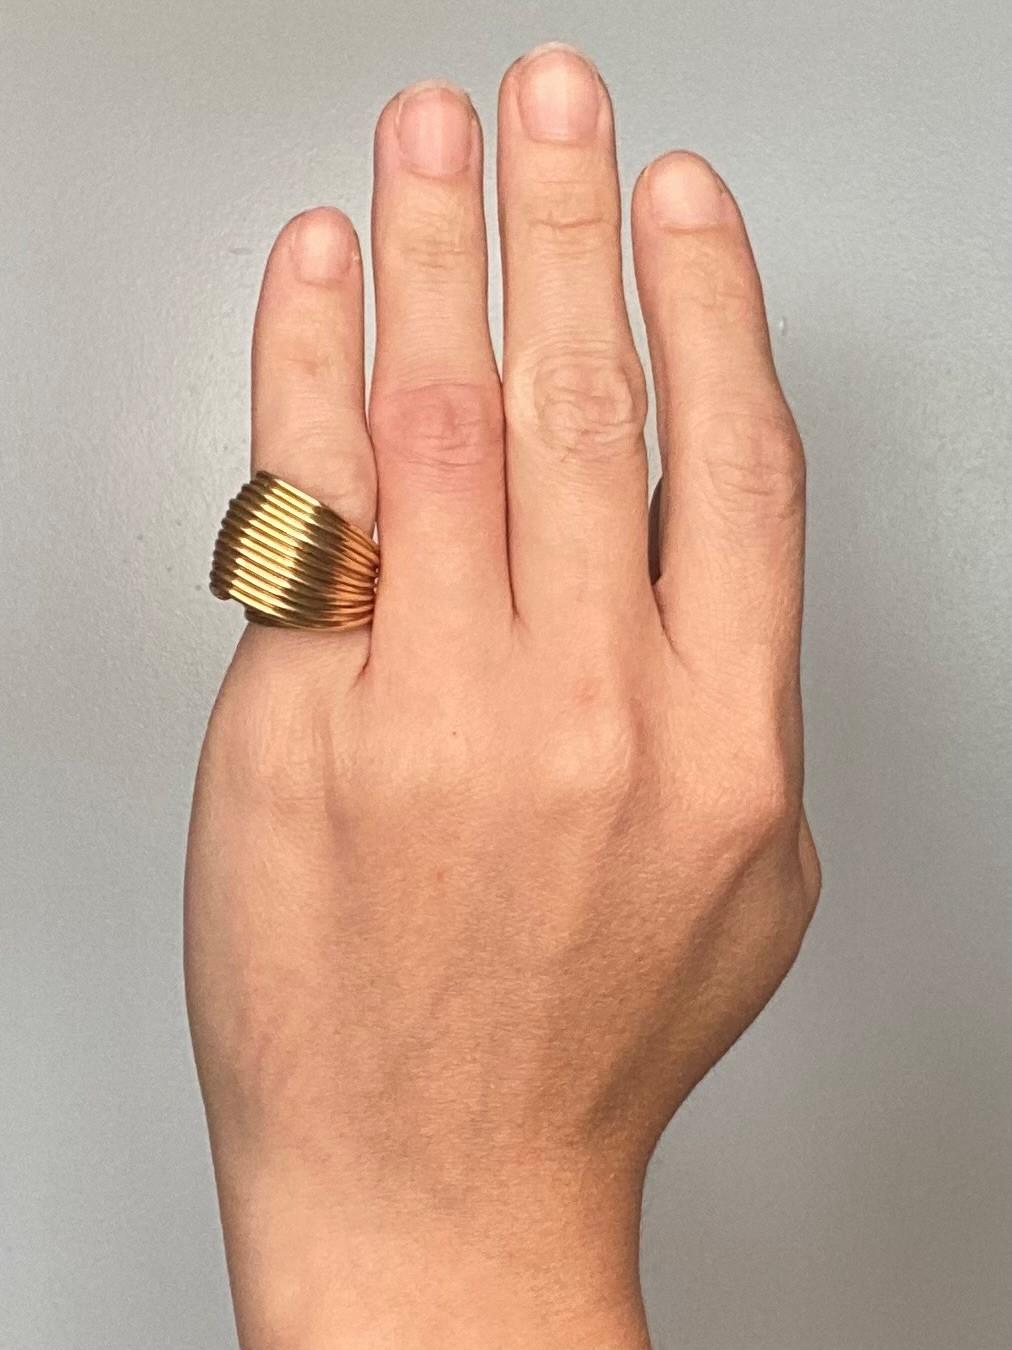 A deco retro / retro cocktail ring.

Sculptural ring created during the late art deco period with retro industrial patterns, circa 1940. This beautiful wavy cocktail ring was crafted with a conjunction of overlapping curved wires crafted in solid